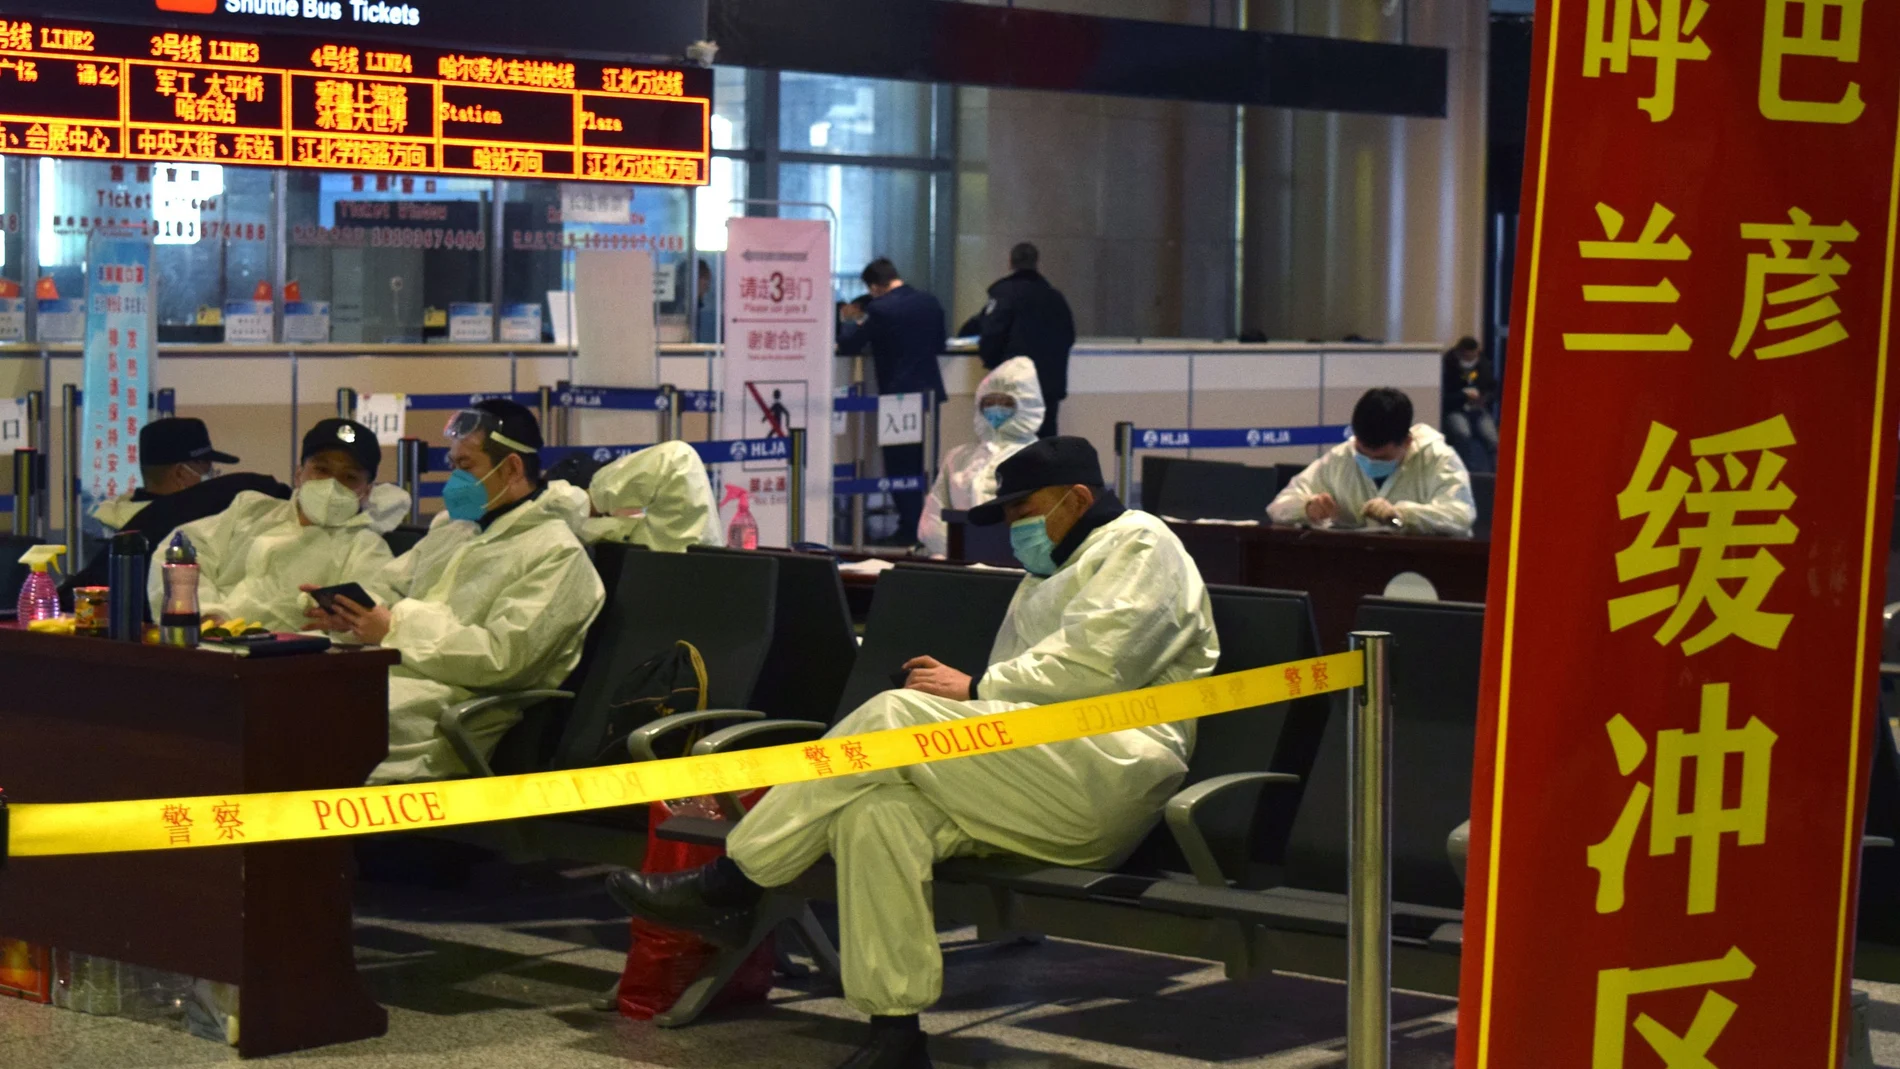 Police officers in protective suits are seen at an aiport in Harbin, capital of Heilongjiang province bordering Russia, following the spread of the novel coronavisurs disease (COVID-19) continues in the country